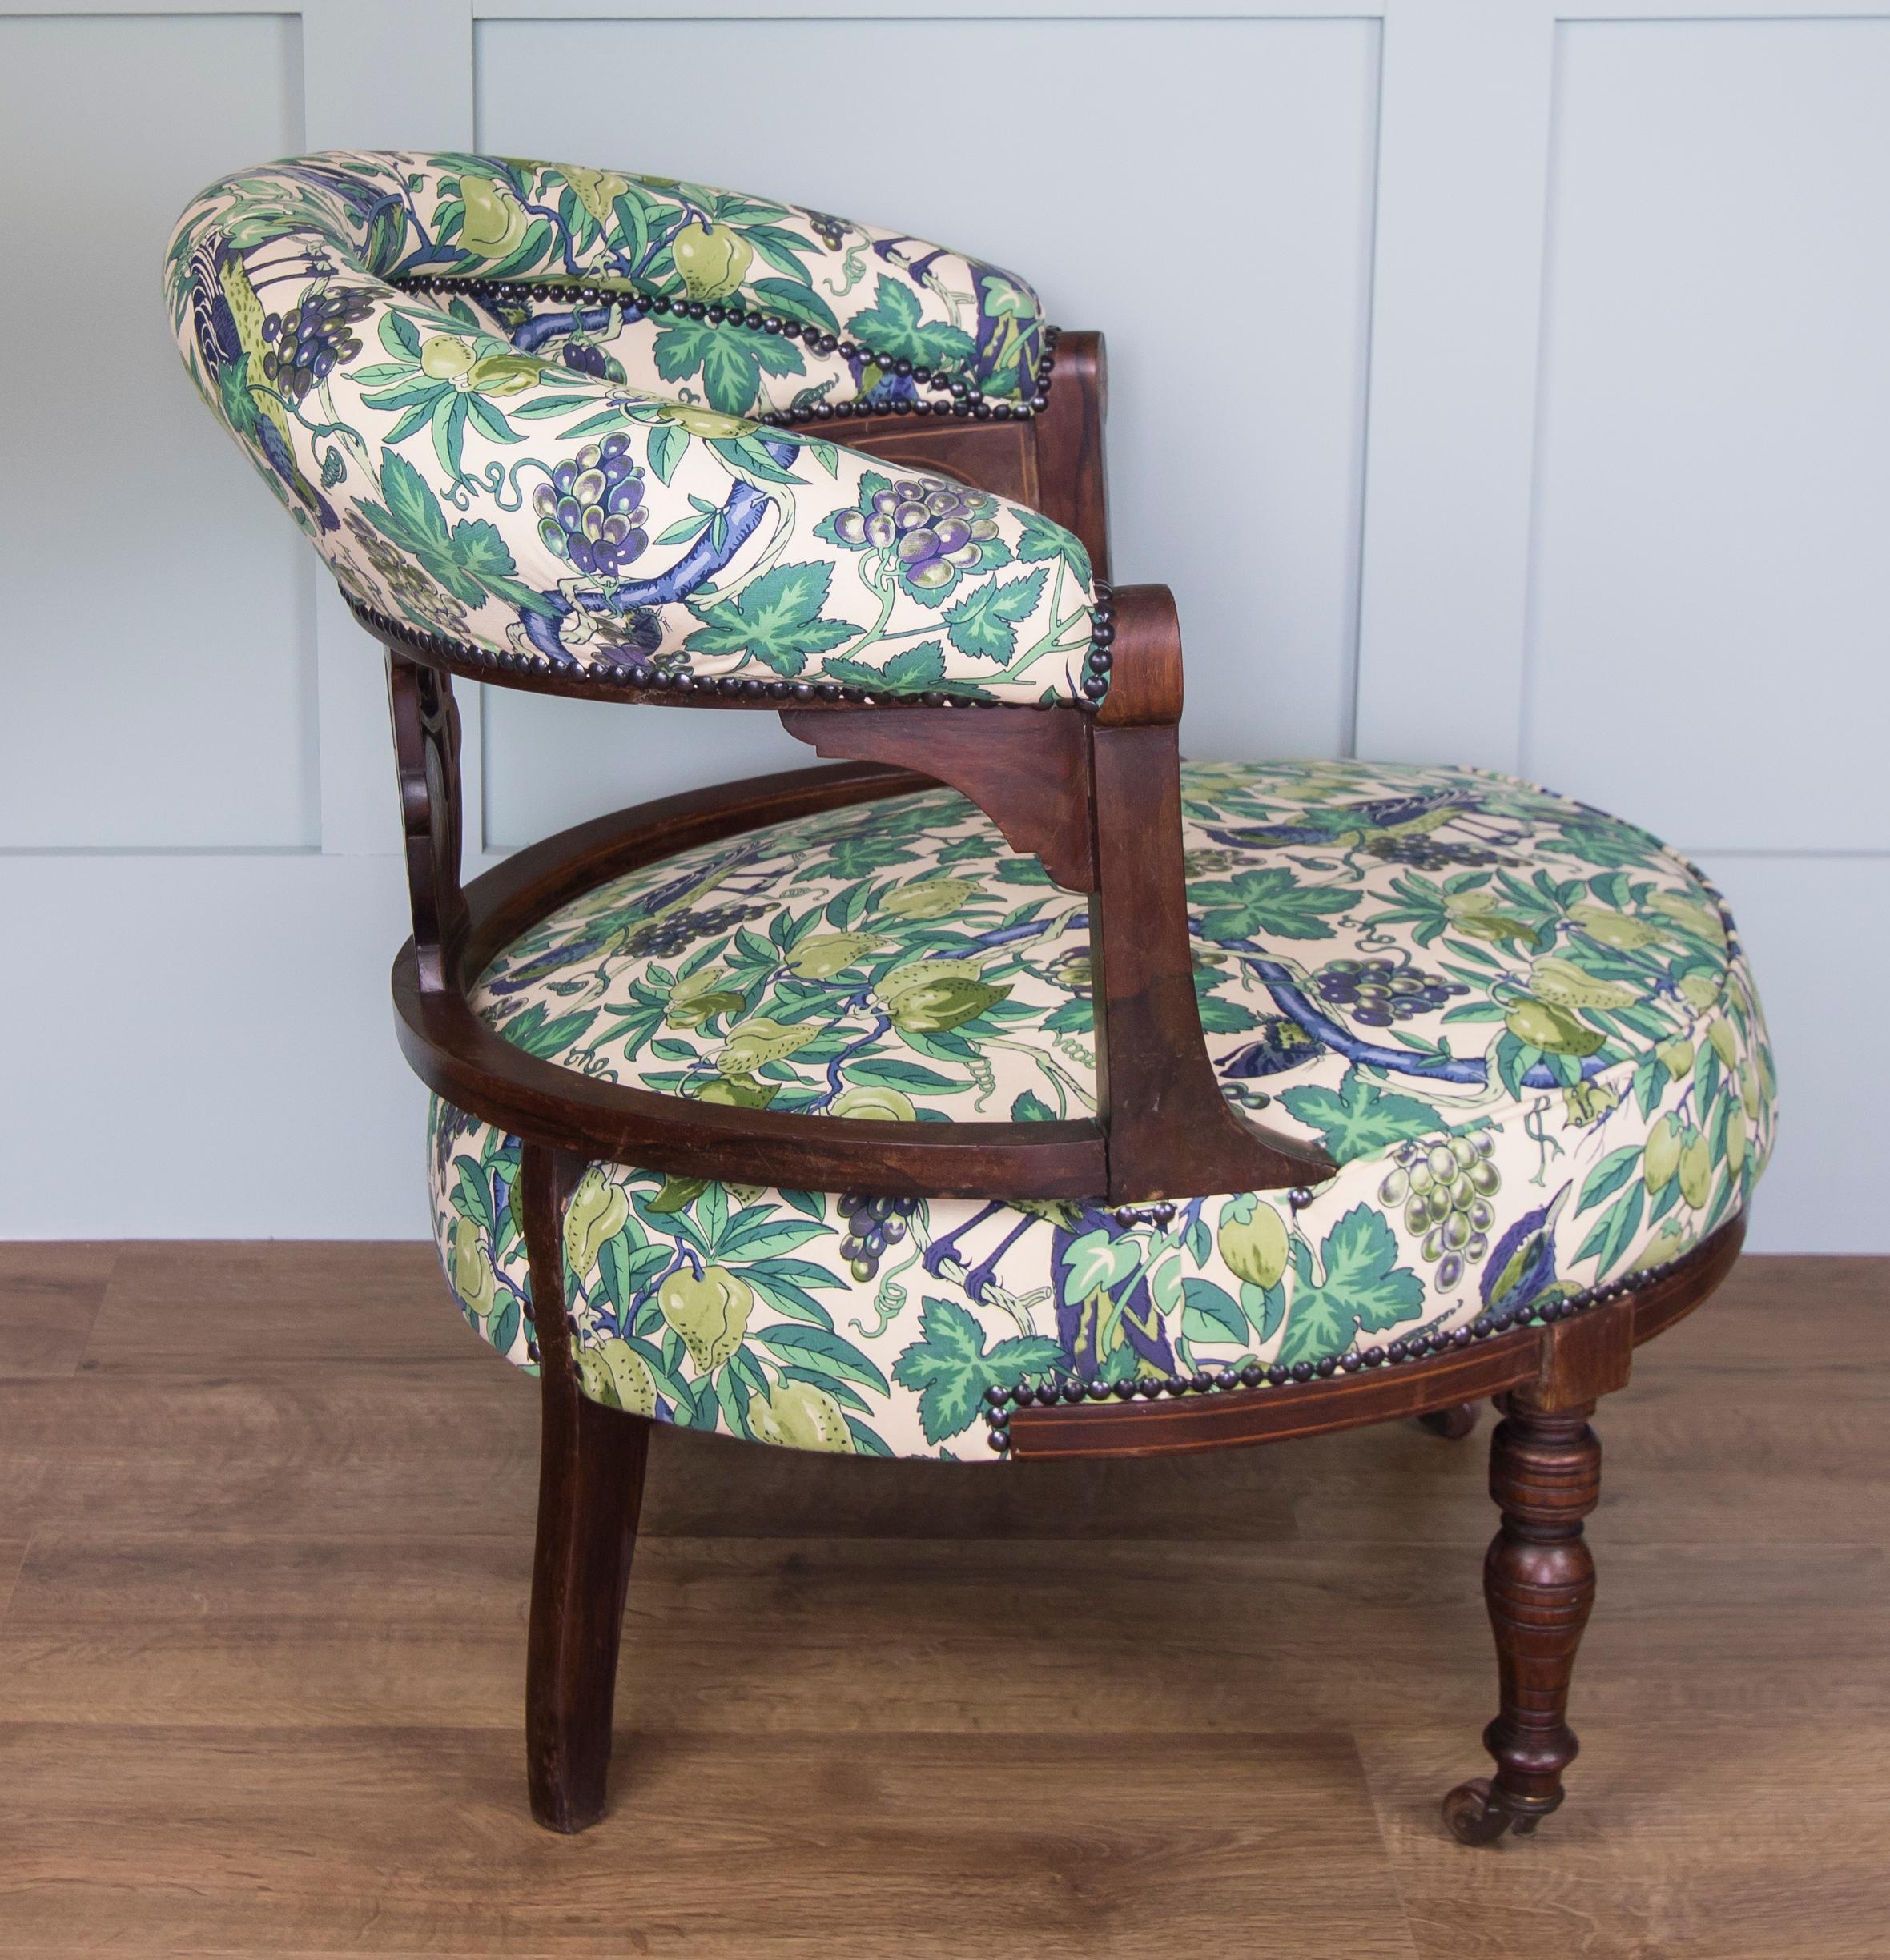 This beautiful little chair has been fully reupholstered using a vintage 1970s cotton furnishing fabric by the famous Liberty of London. Metal, antique black studwork secures the fabric. Greens, blues and purples come through in this delightful bird